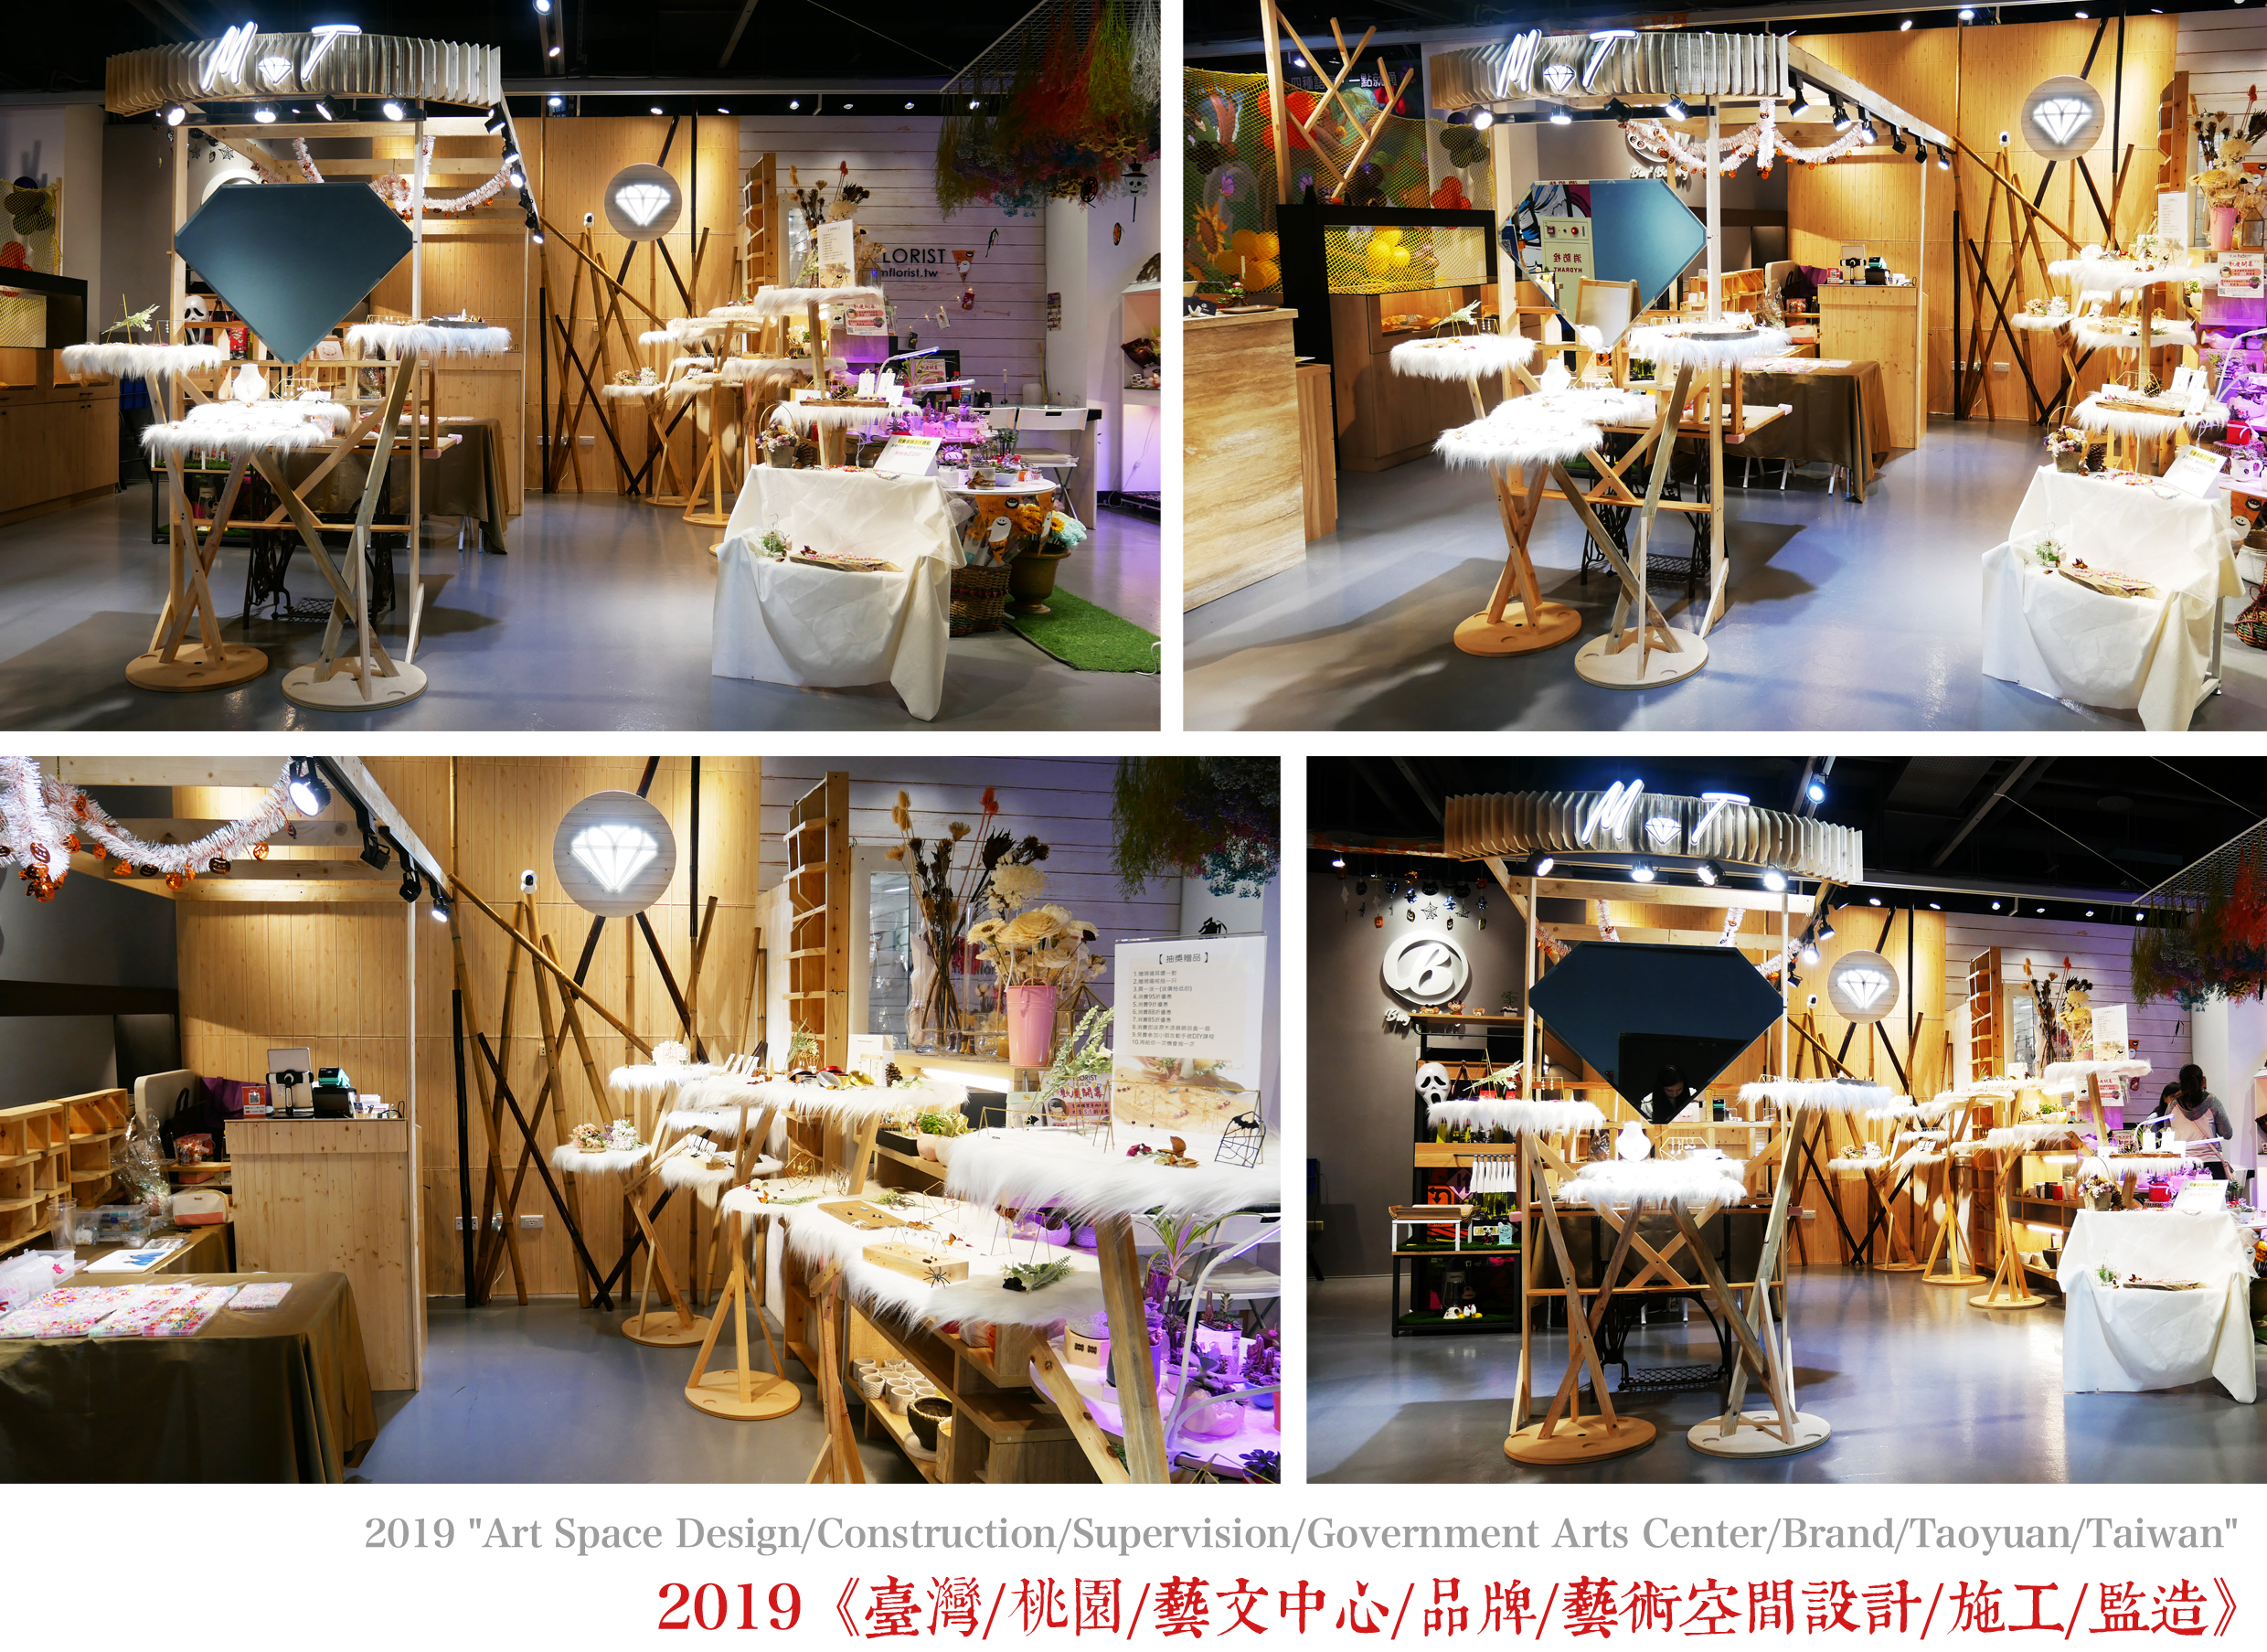 2019 "Art Space Design/Construction/Supervision/Government Arts Center/Brand/Taoyuan/Taiwan"2019《臺灣/桃園/藝文中心/品牌/藝術空間設計/施工/監造》【Just Jump Culture all rights reserved子丑文創/版權所有】